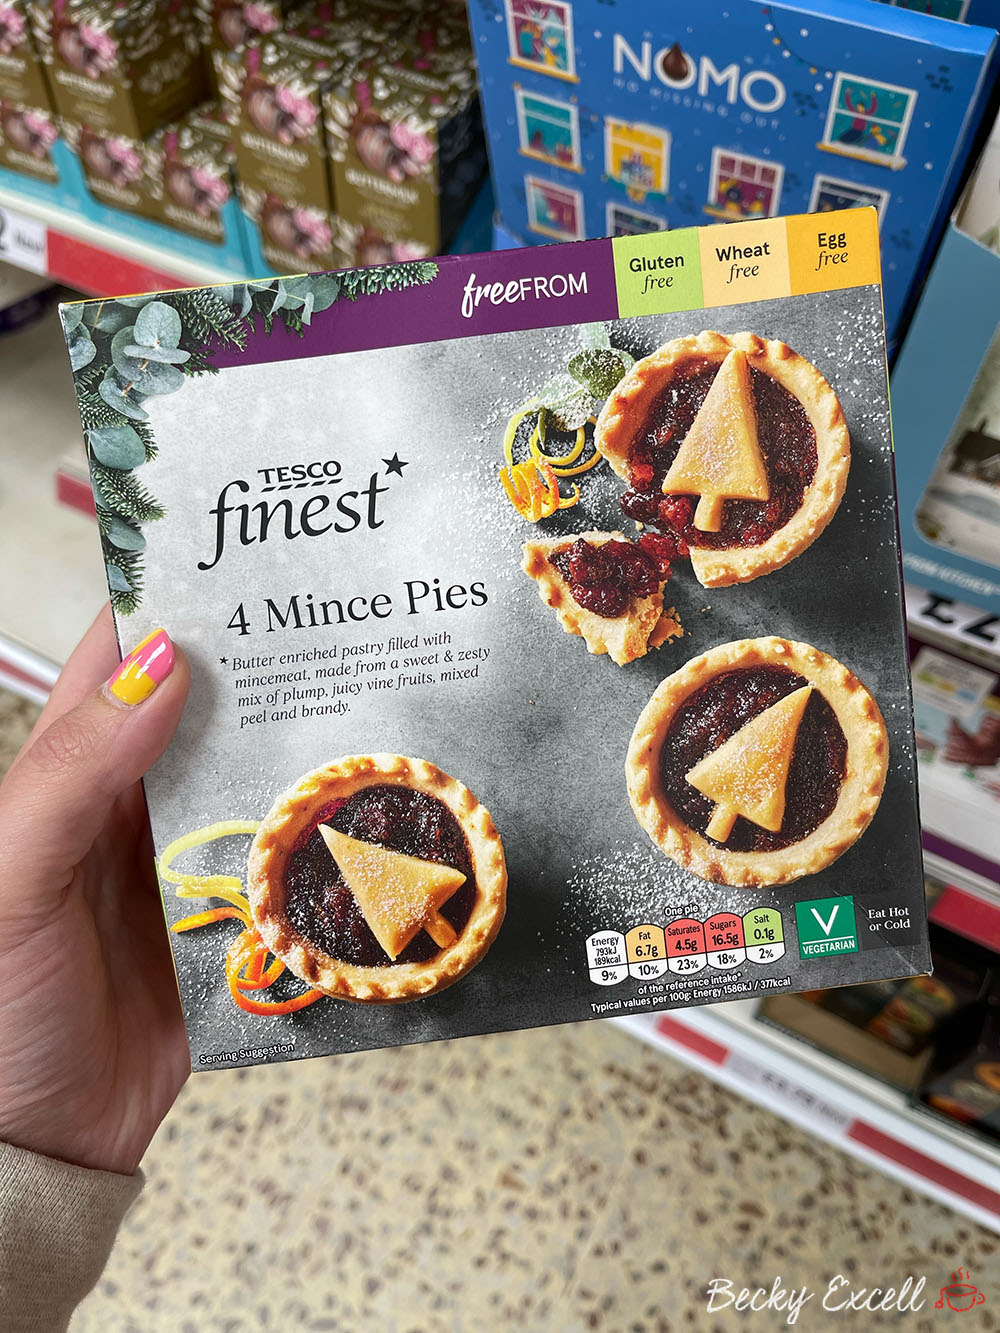 Tescos gluten-free Christmas products 2021: Finest Mince Pies